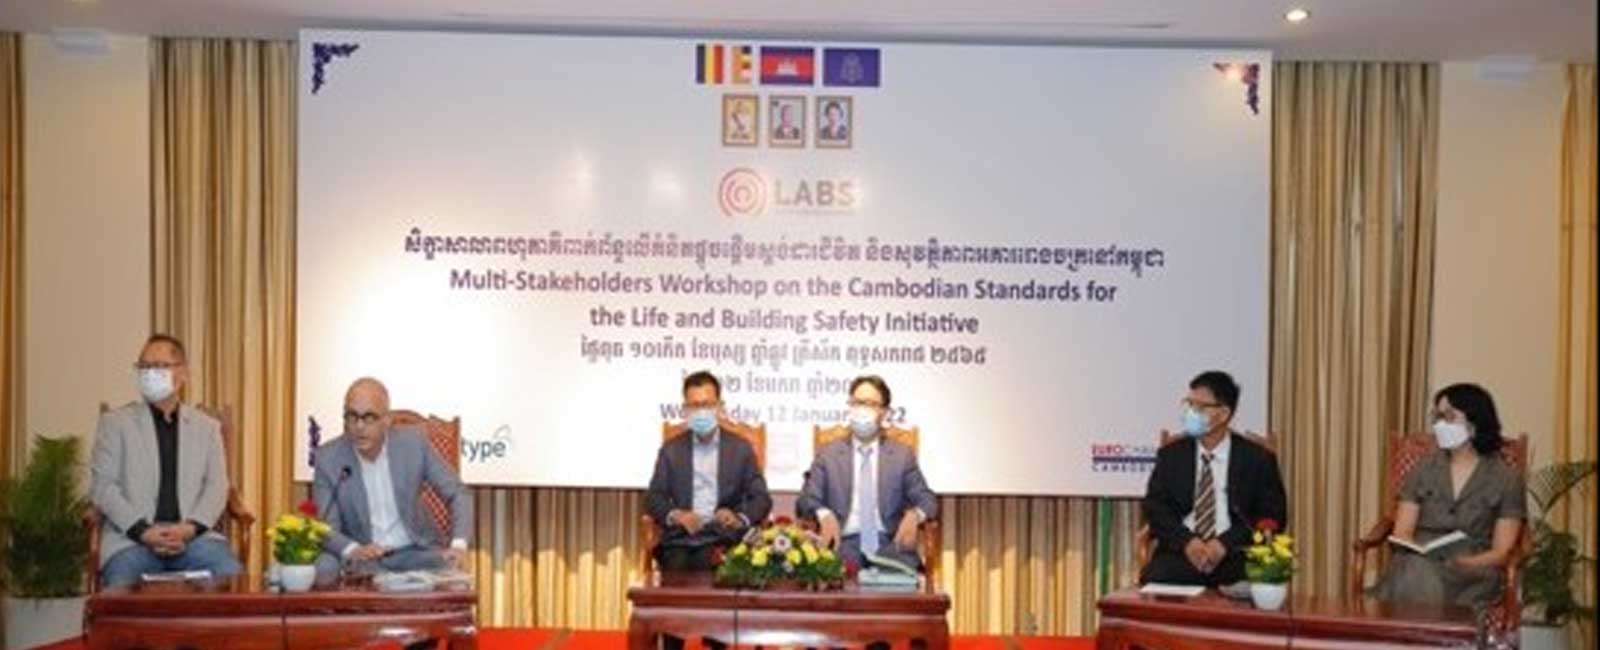 LABS organizes consultation workshop on Standards & Methodology in Cambodia